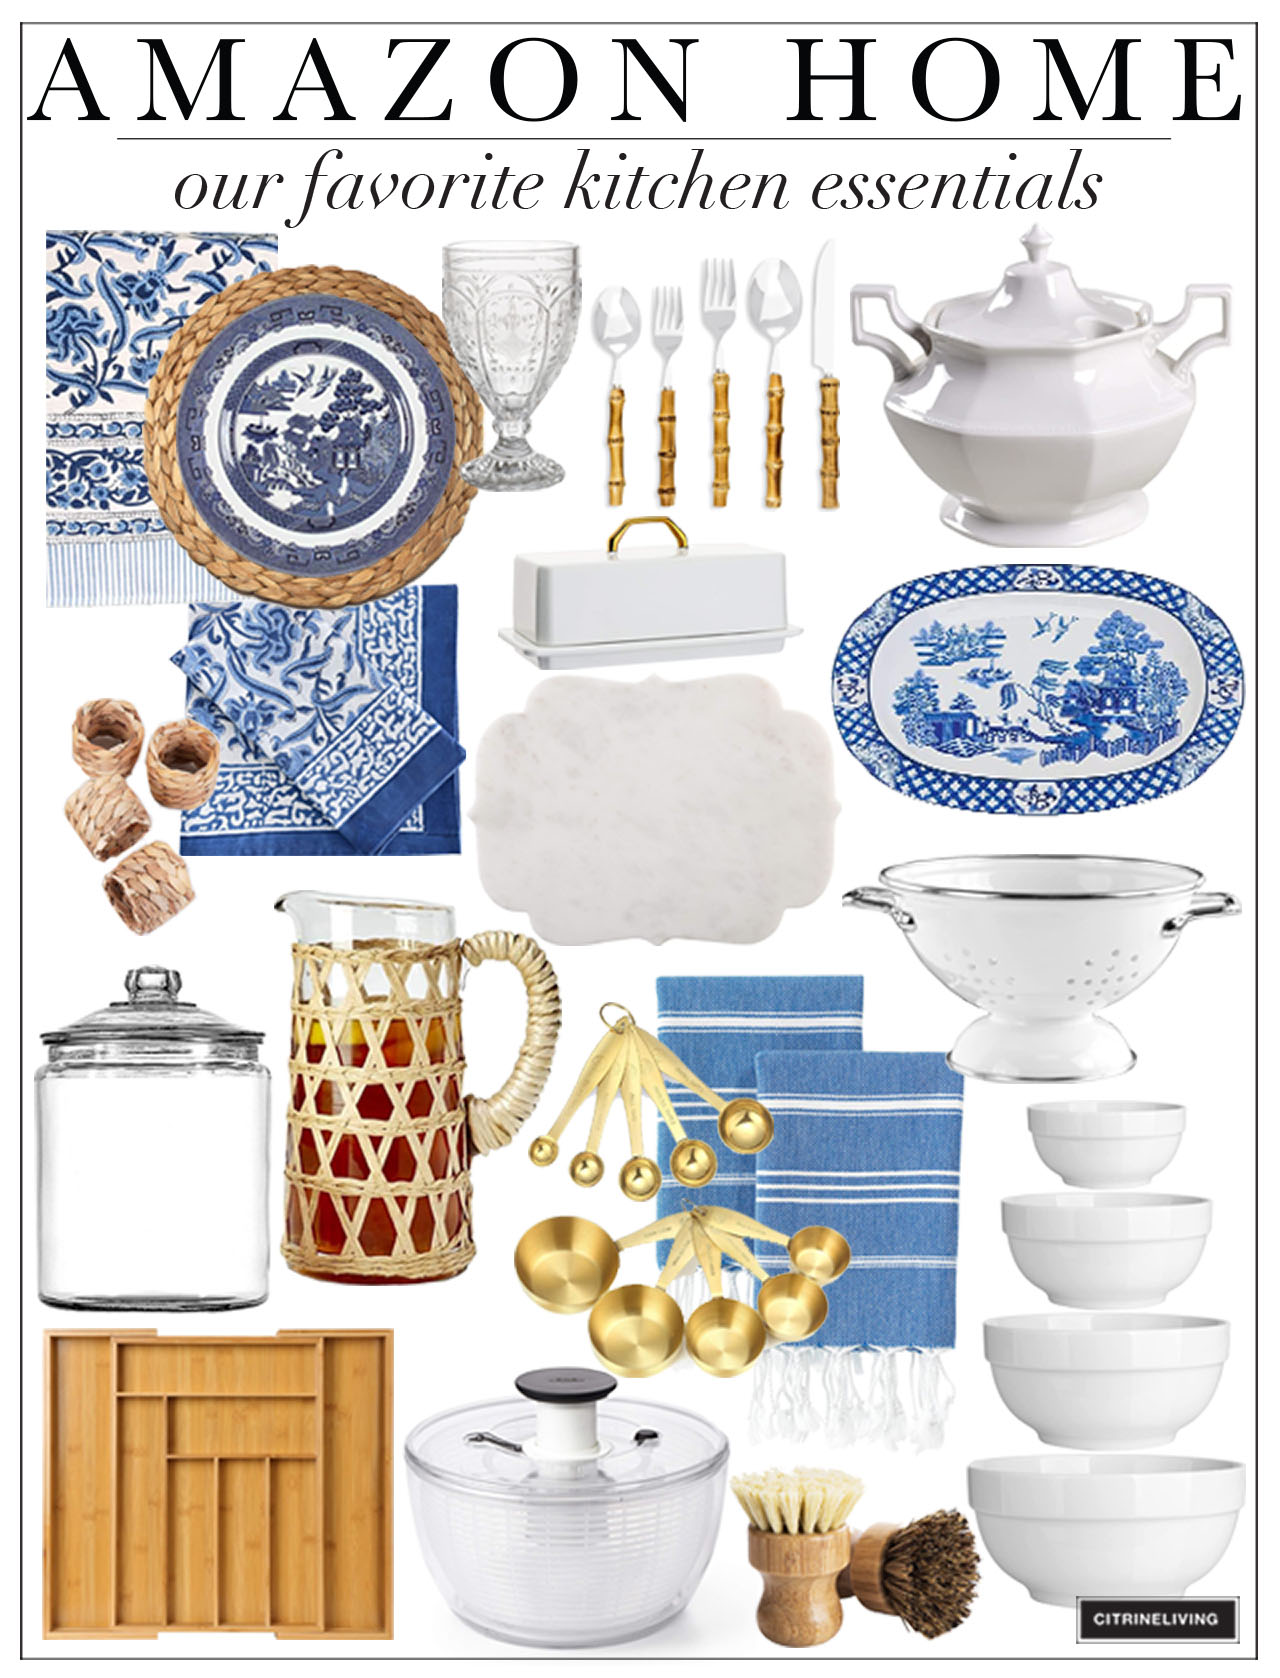 Kitchen essentials from Amazon home including blue and white dishes, bamboo flatware, nesting bowls and more!